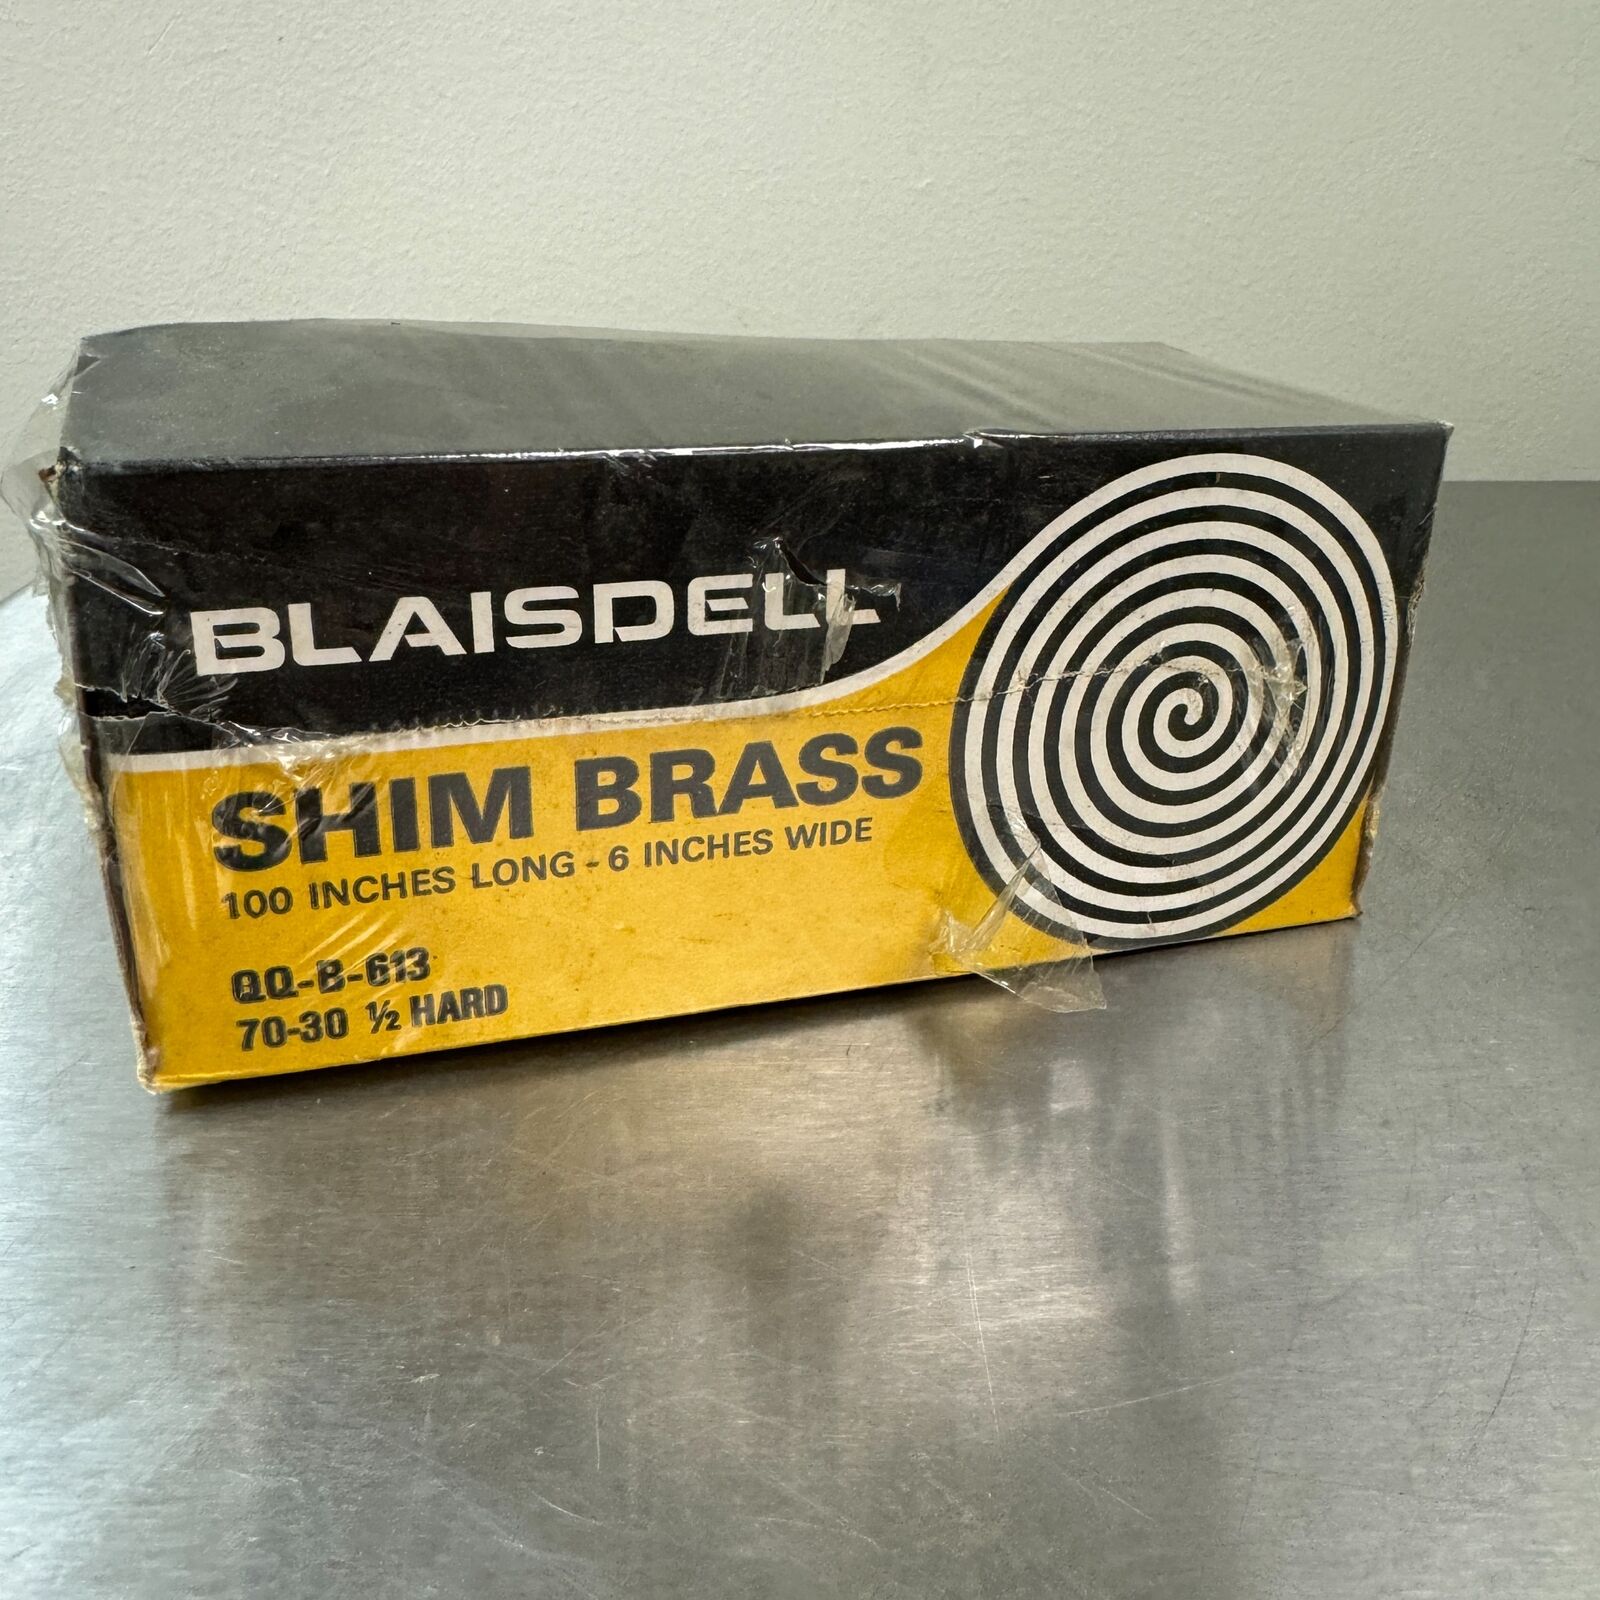 Vtg BLAISDELL Shim Brass 100 Inches Long 6 Inches Wide New / Sealed CBS 5 / 005